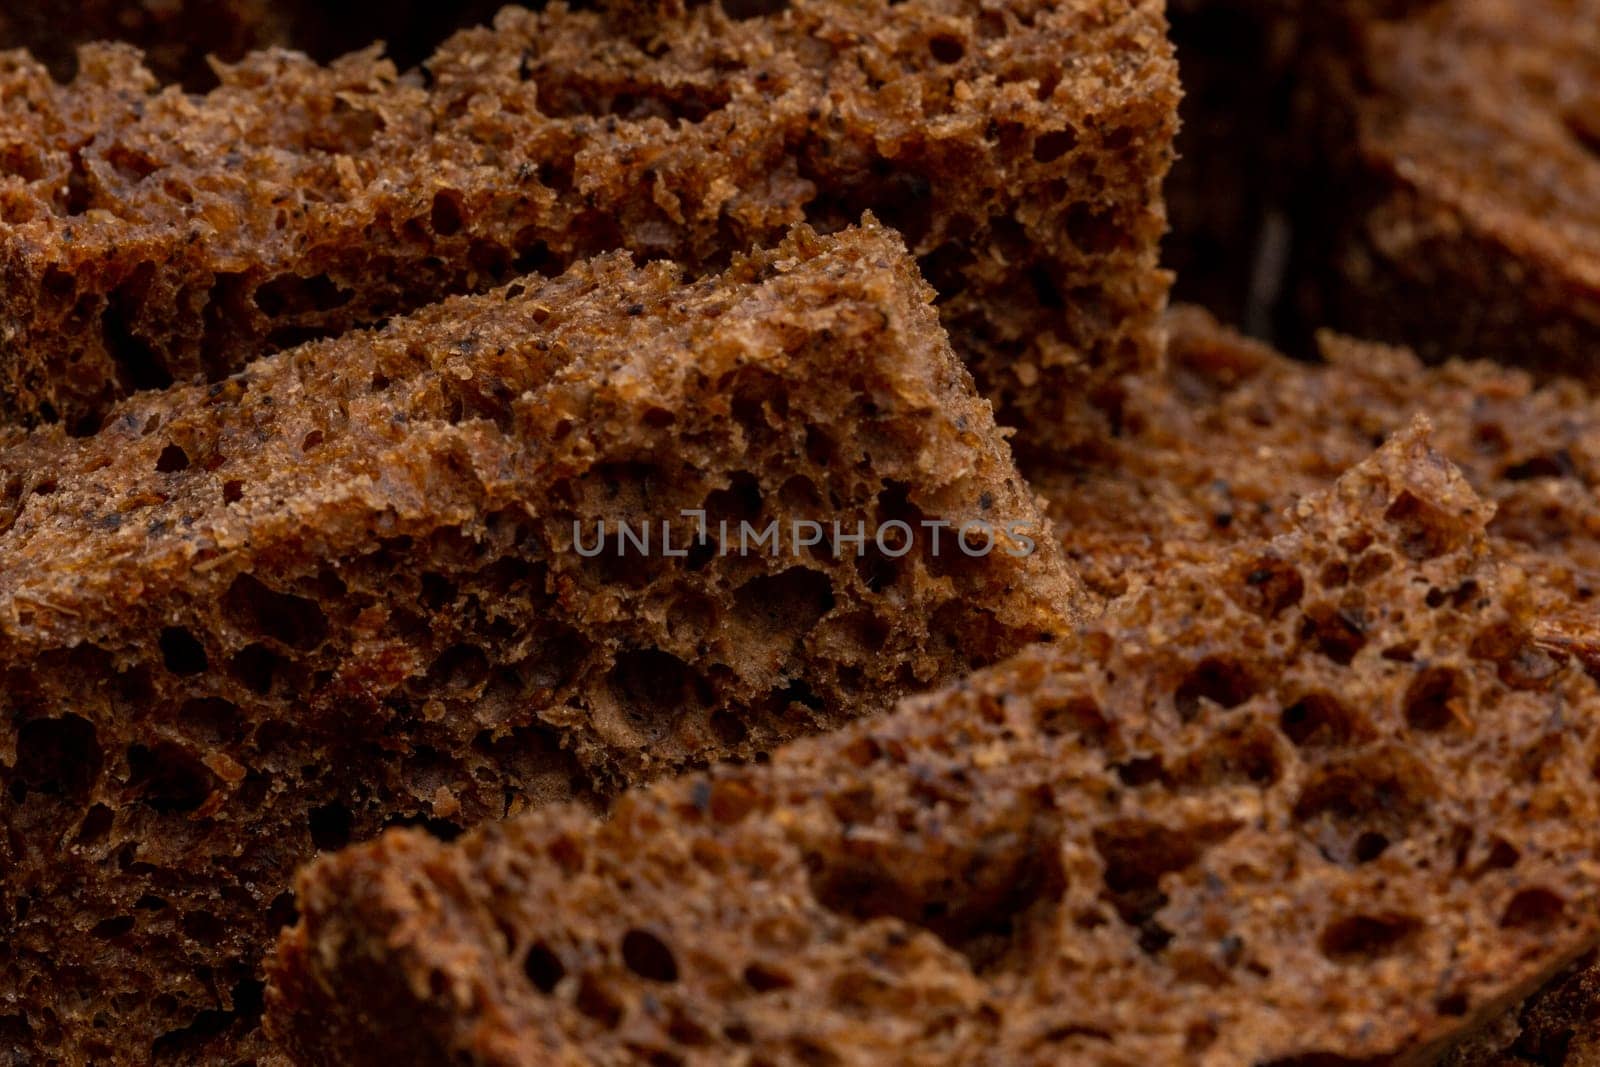 Rye croutons close-up view, dark bread texture, macro photography